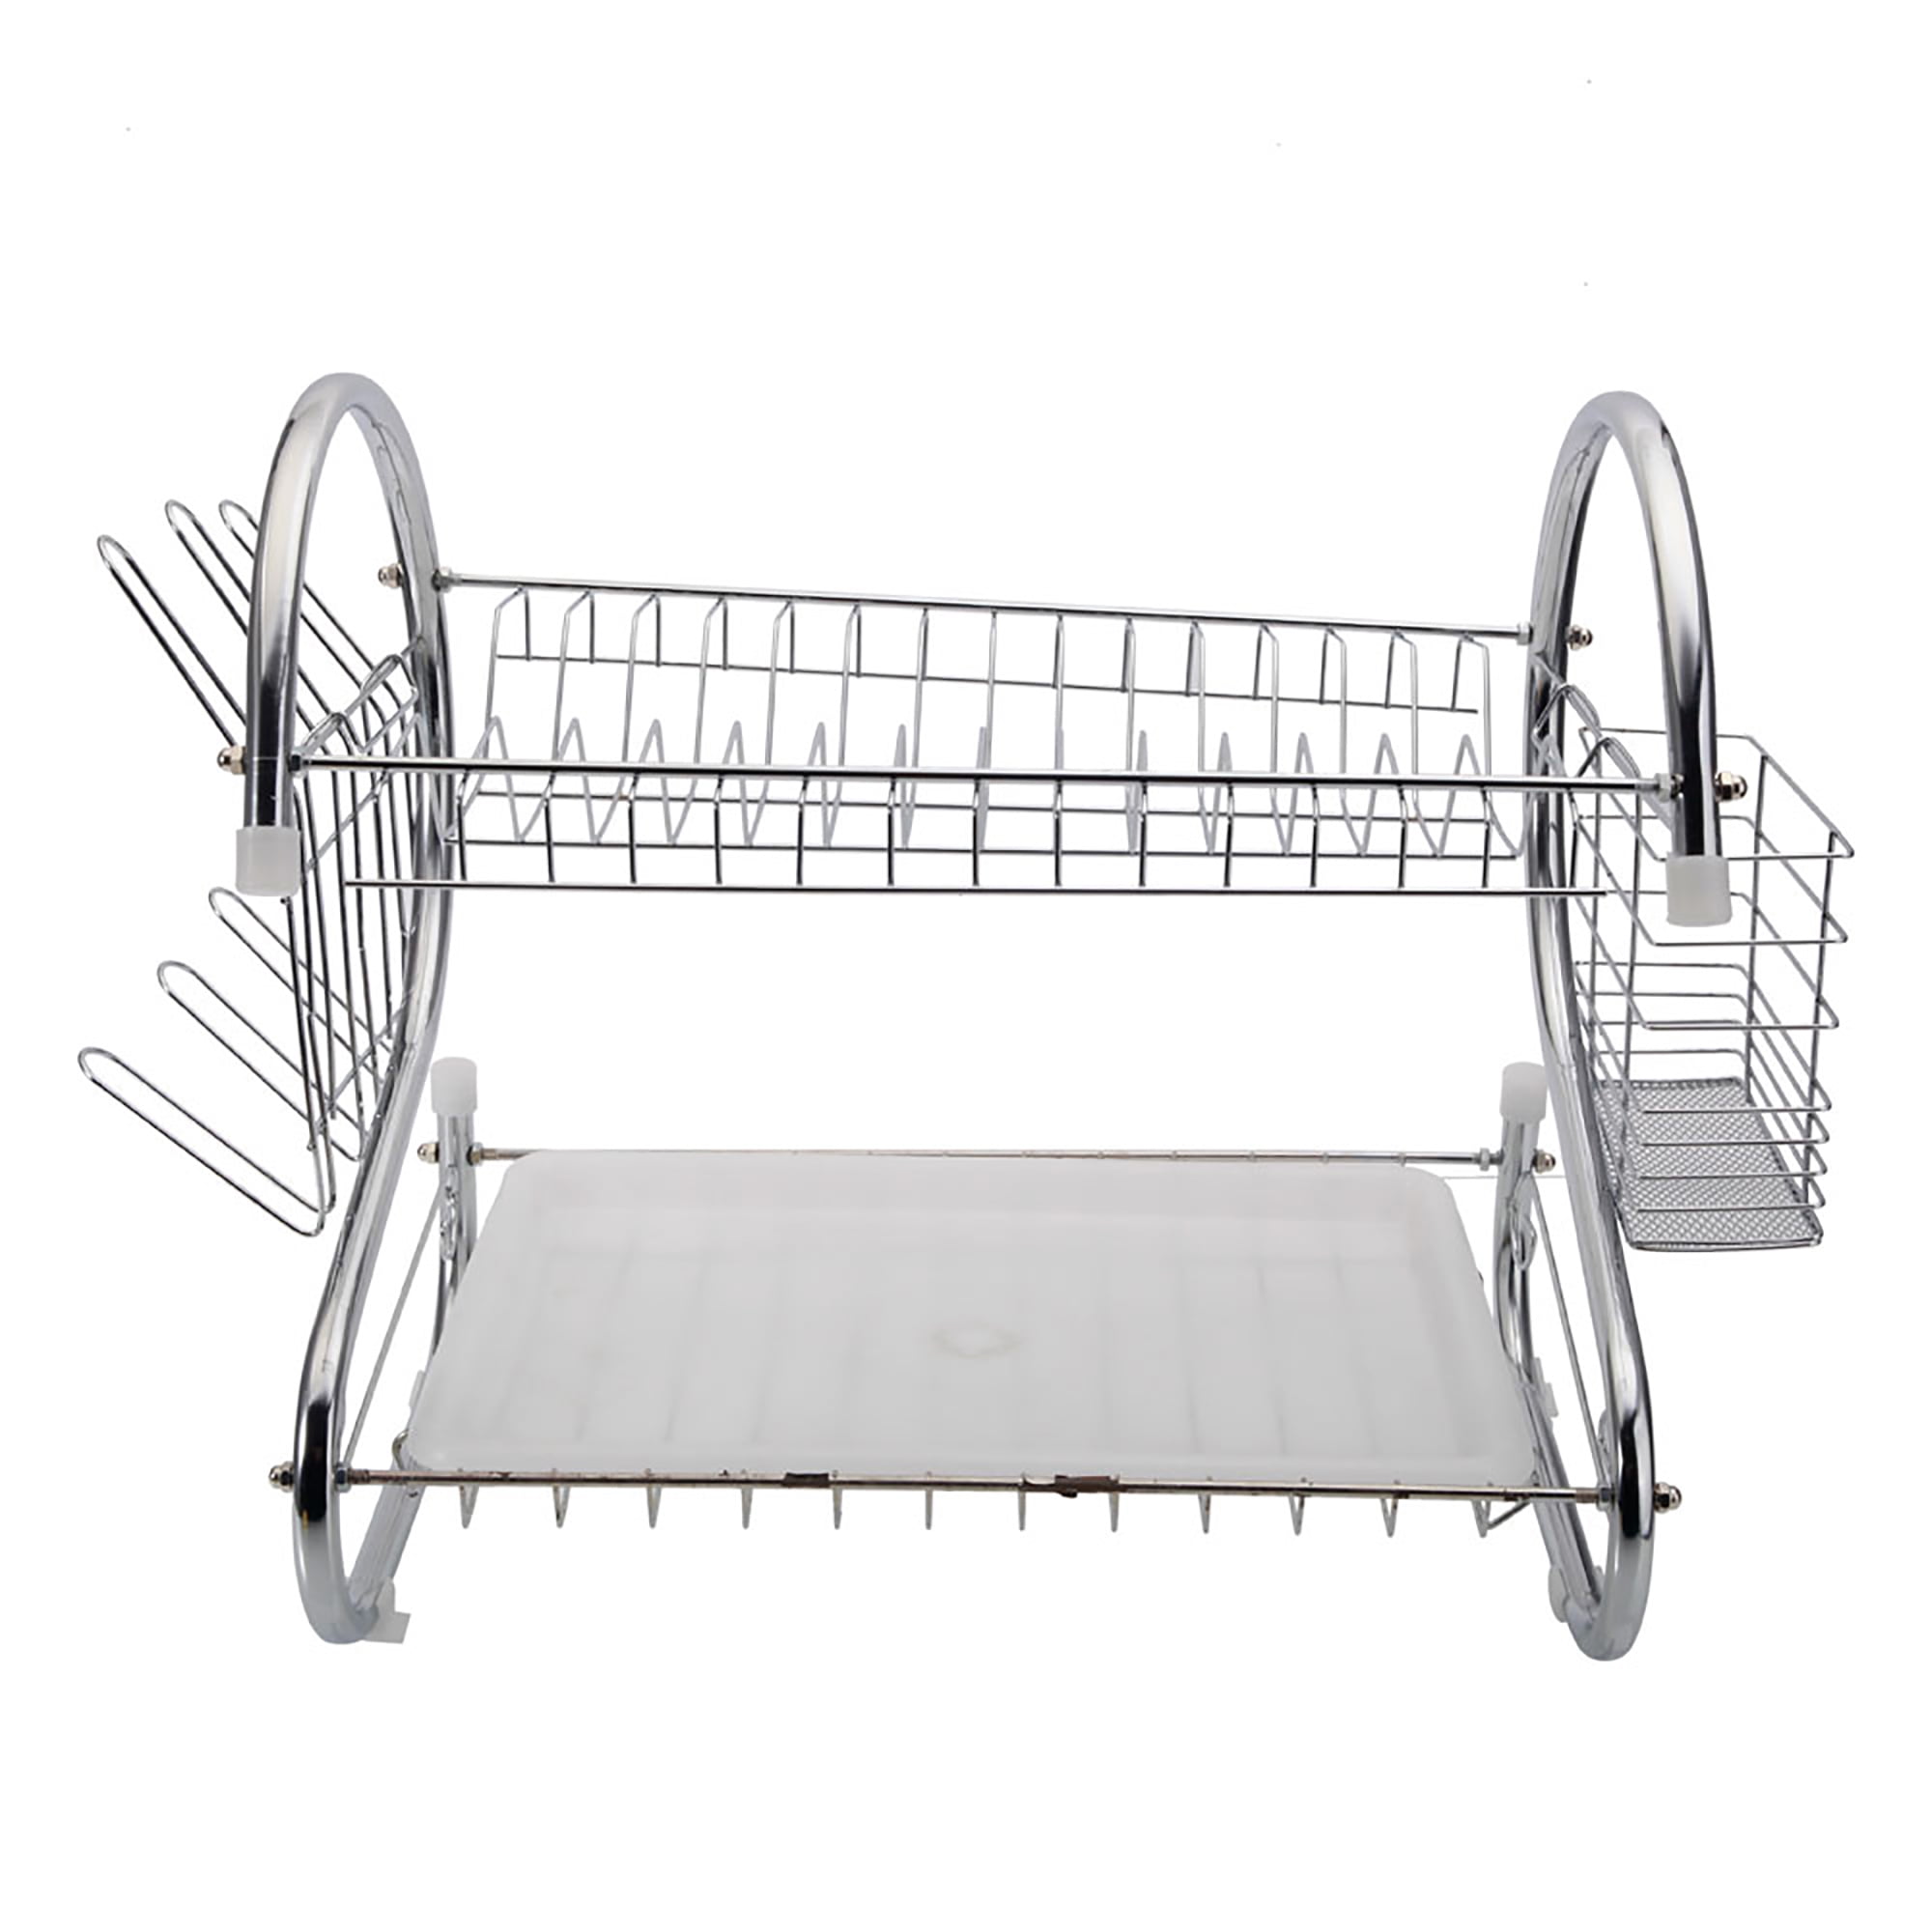 Veryke Stainless Steel Over The Sink Dish Rack w/ Hooks, Kitchen Double  Layer Bowl Rack Shelf - Silver 